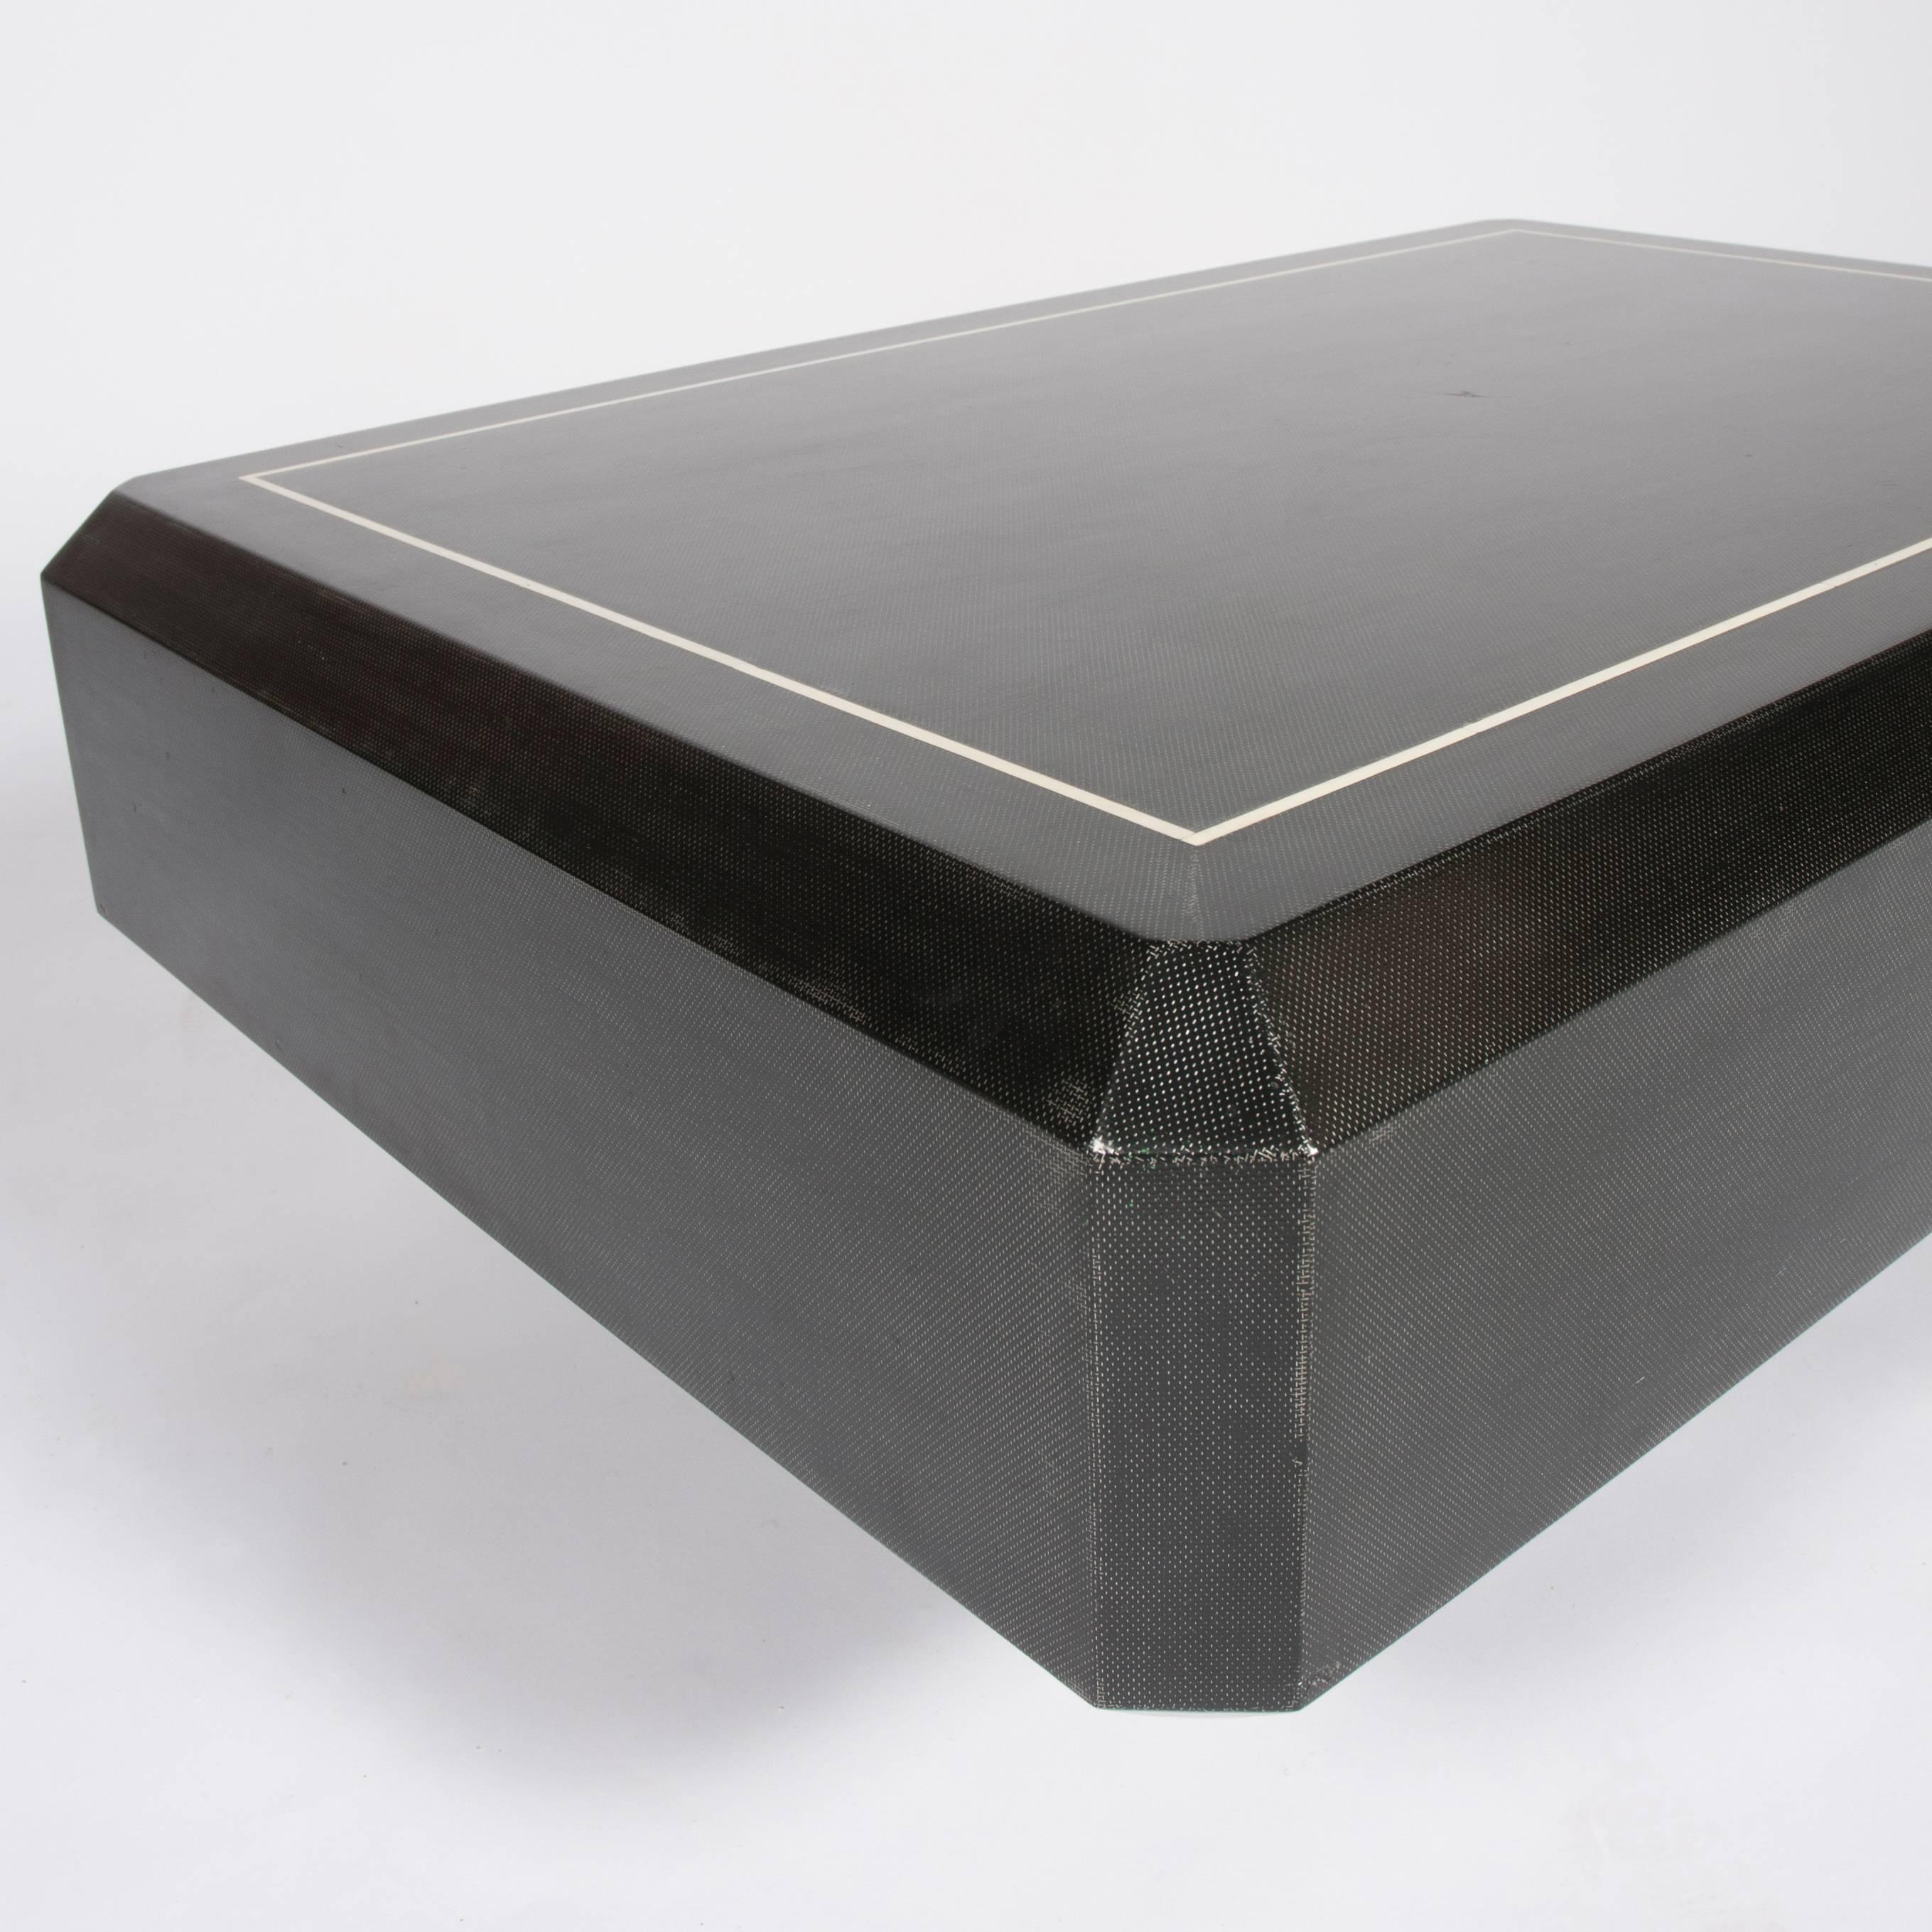 An unusual 1970s, Karl Springer coffee table with a faceted, rectangular top covered in lacquered black linen fabric with inset bone trim, over a recessed pedestal base illuminated by four lights. 


